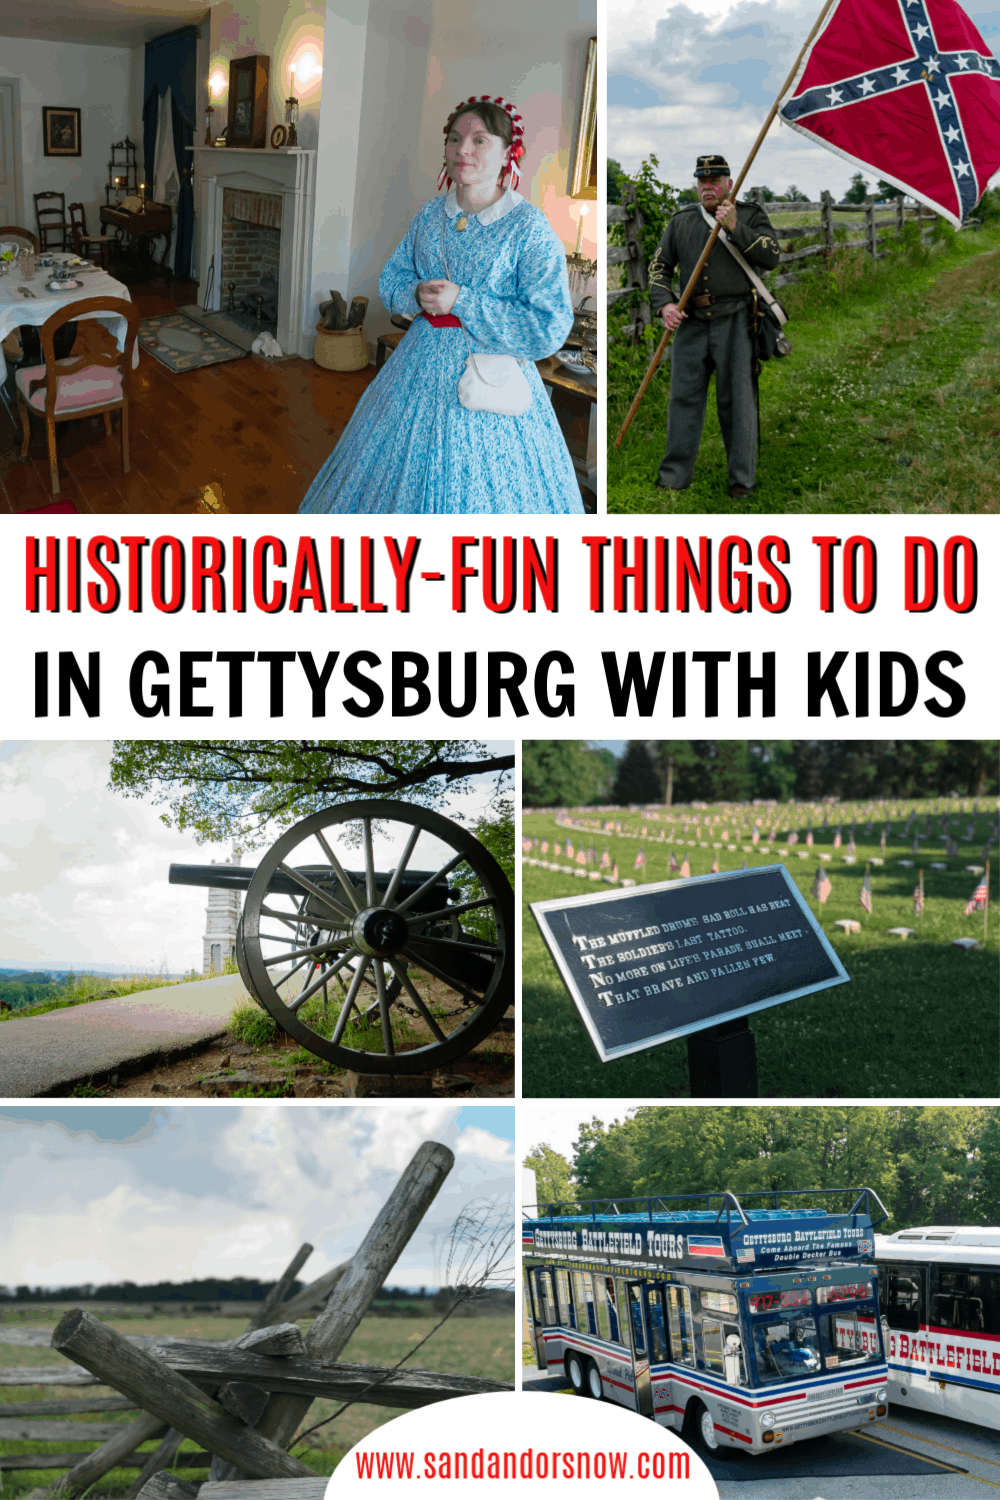 Headed to Gettysburg, PA, and want to make your family trip a great one? From battlefield tours to ride sin a double decker bus, here are six historically-fun things to do in Gettysburg with kids! #VisitGettysburg #VisitPA #Gettysburg #FamilyTravel #History #AmericanHistory #HistoricalTravel